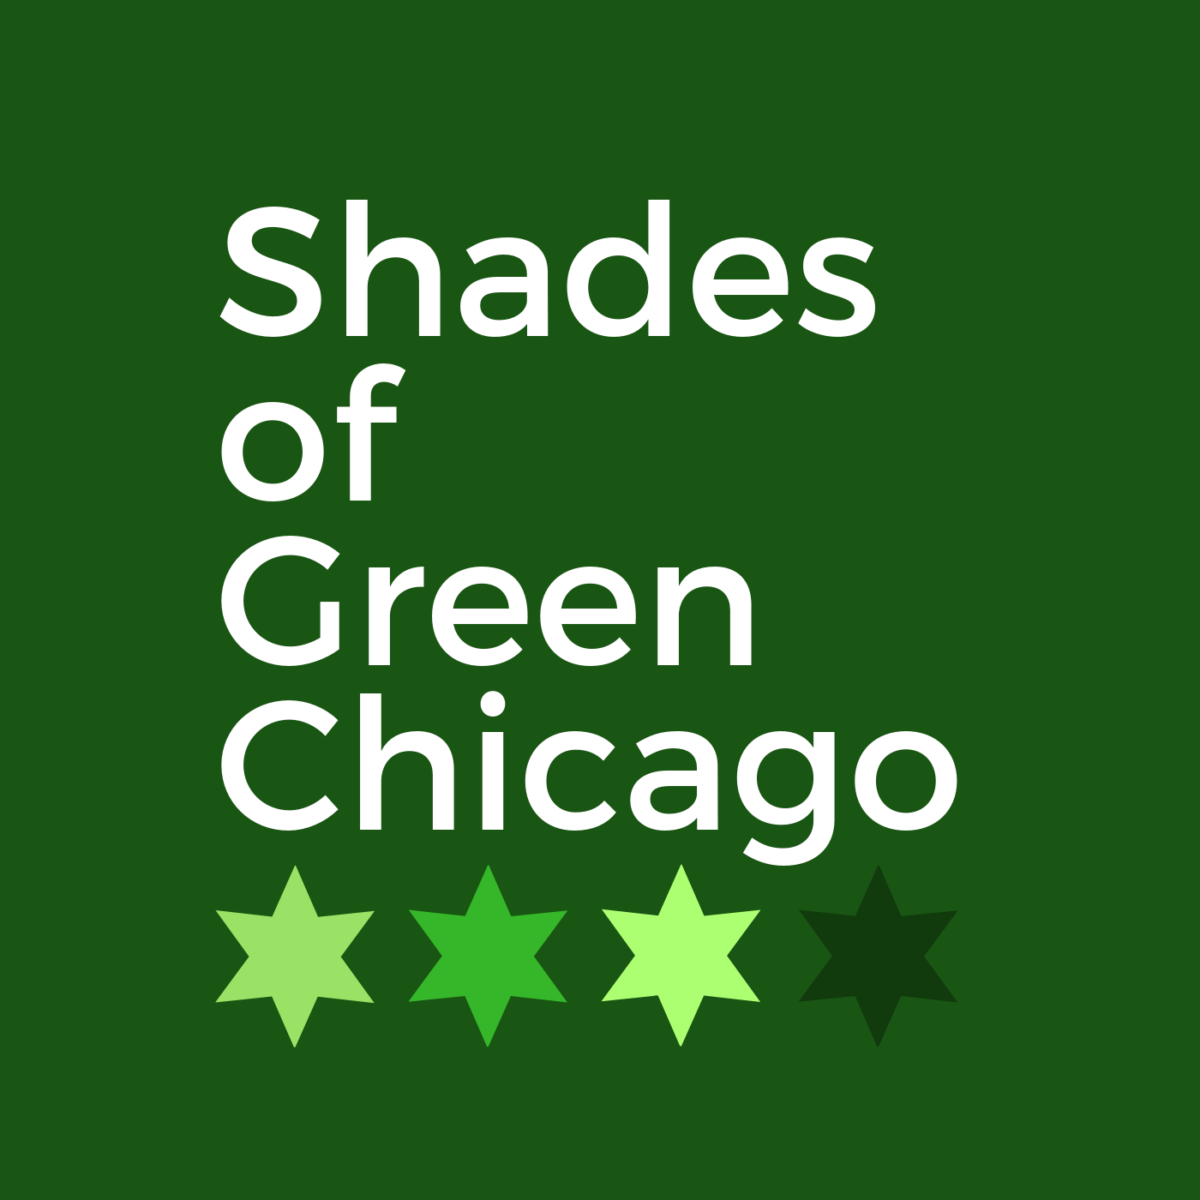 Shades of Green Chicago